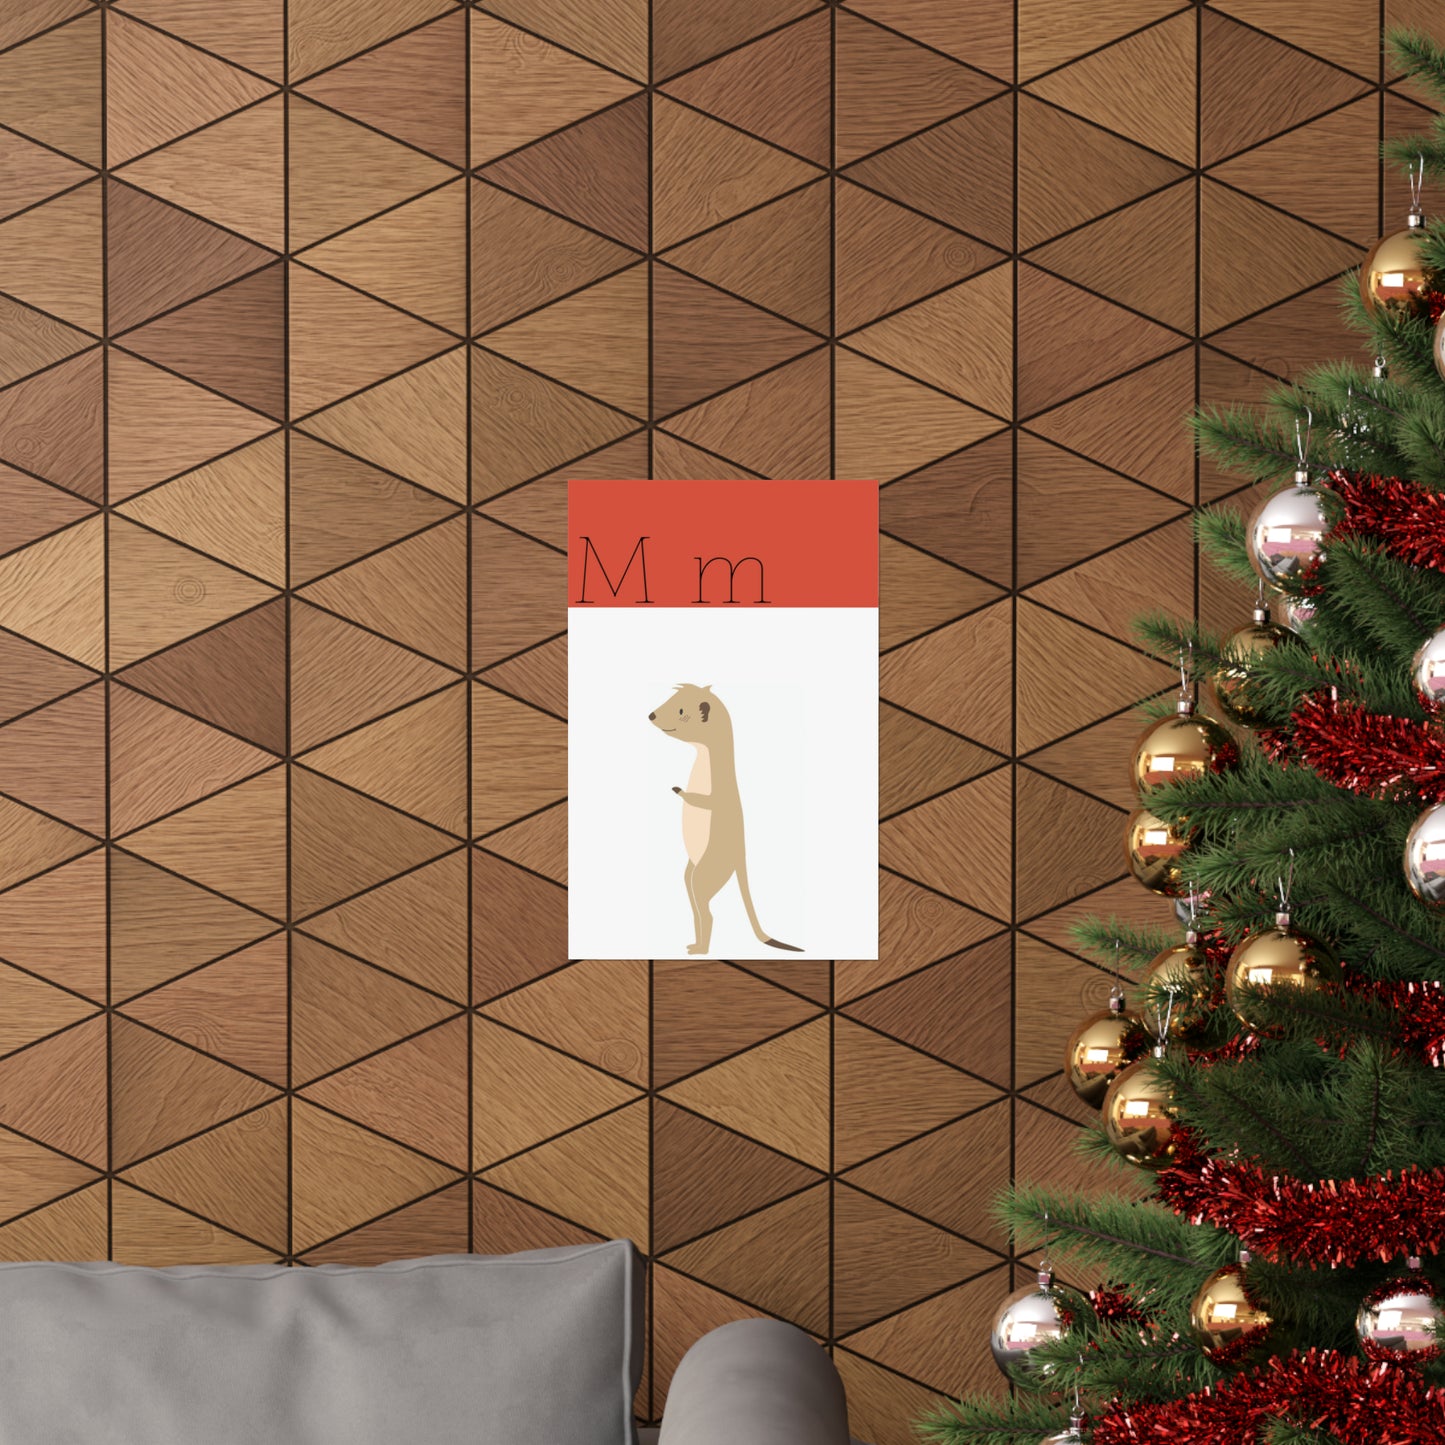 Meerkat Poster on Wooden Wall Beside a Christmas Tree